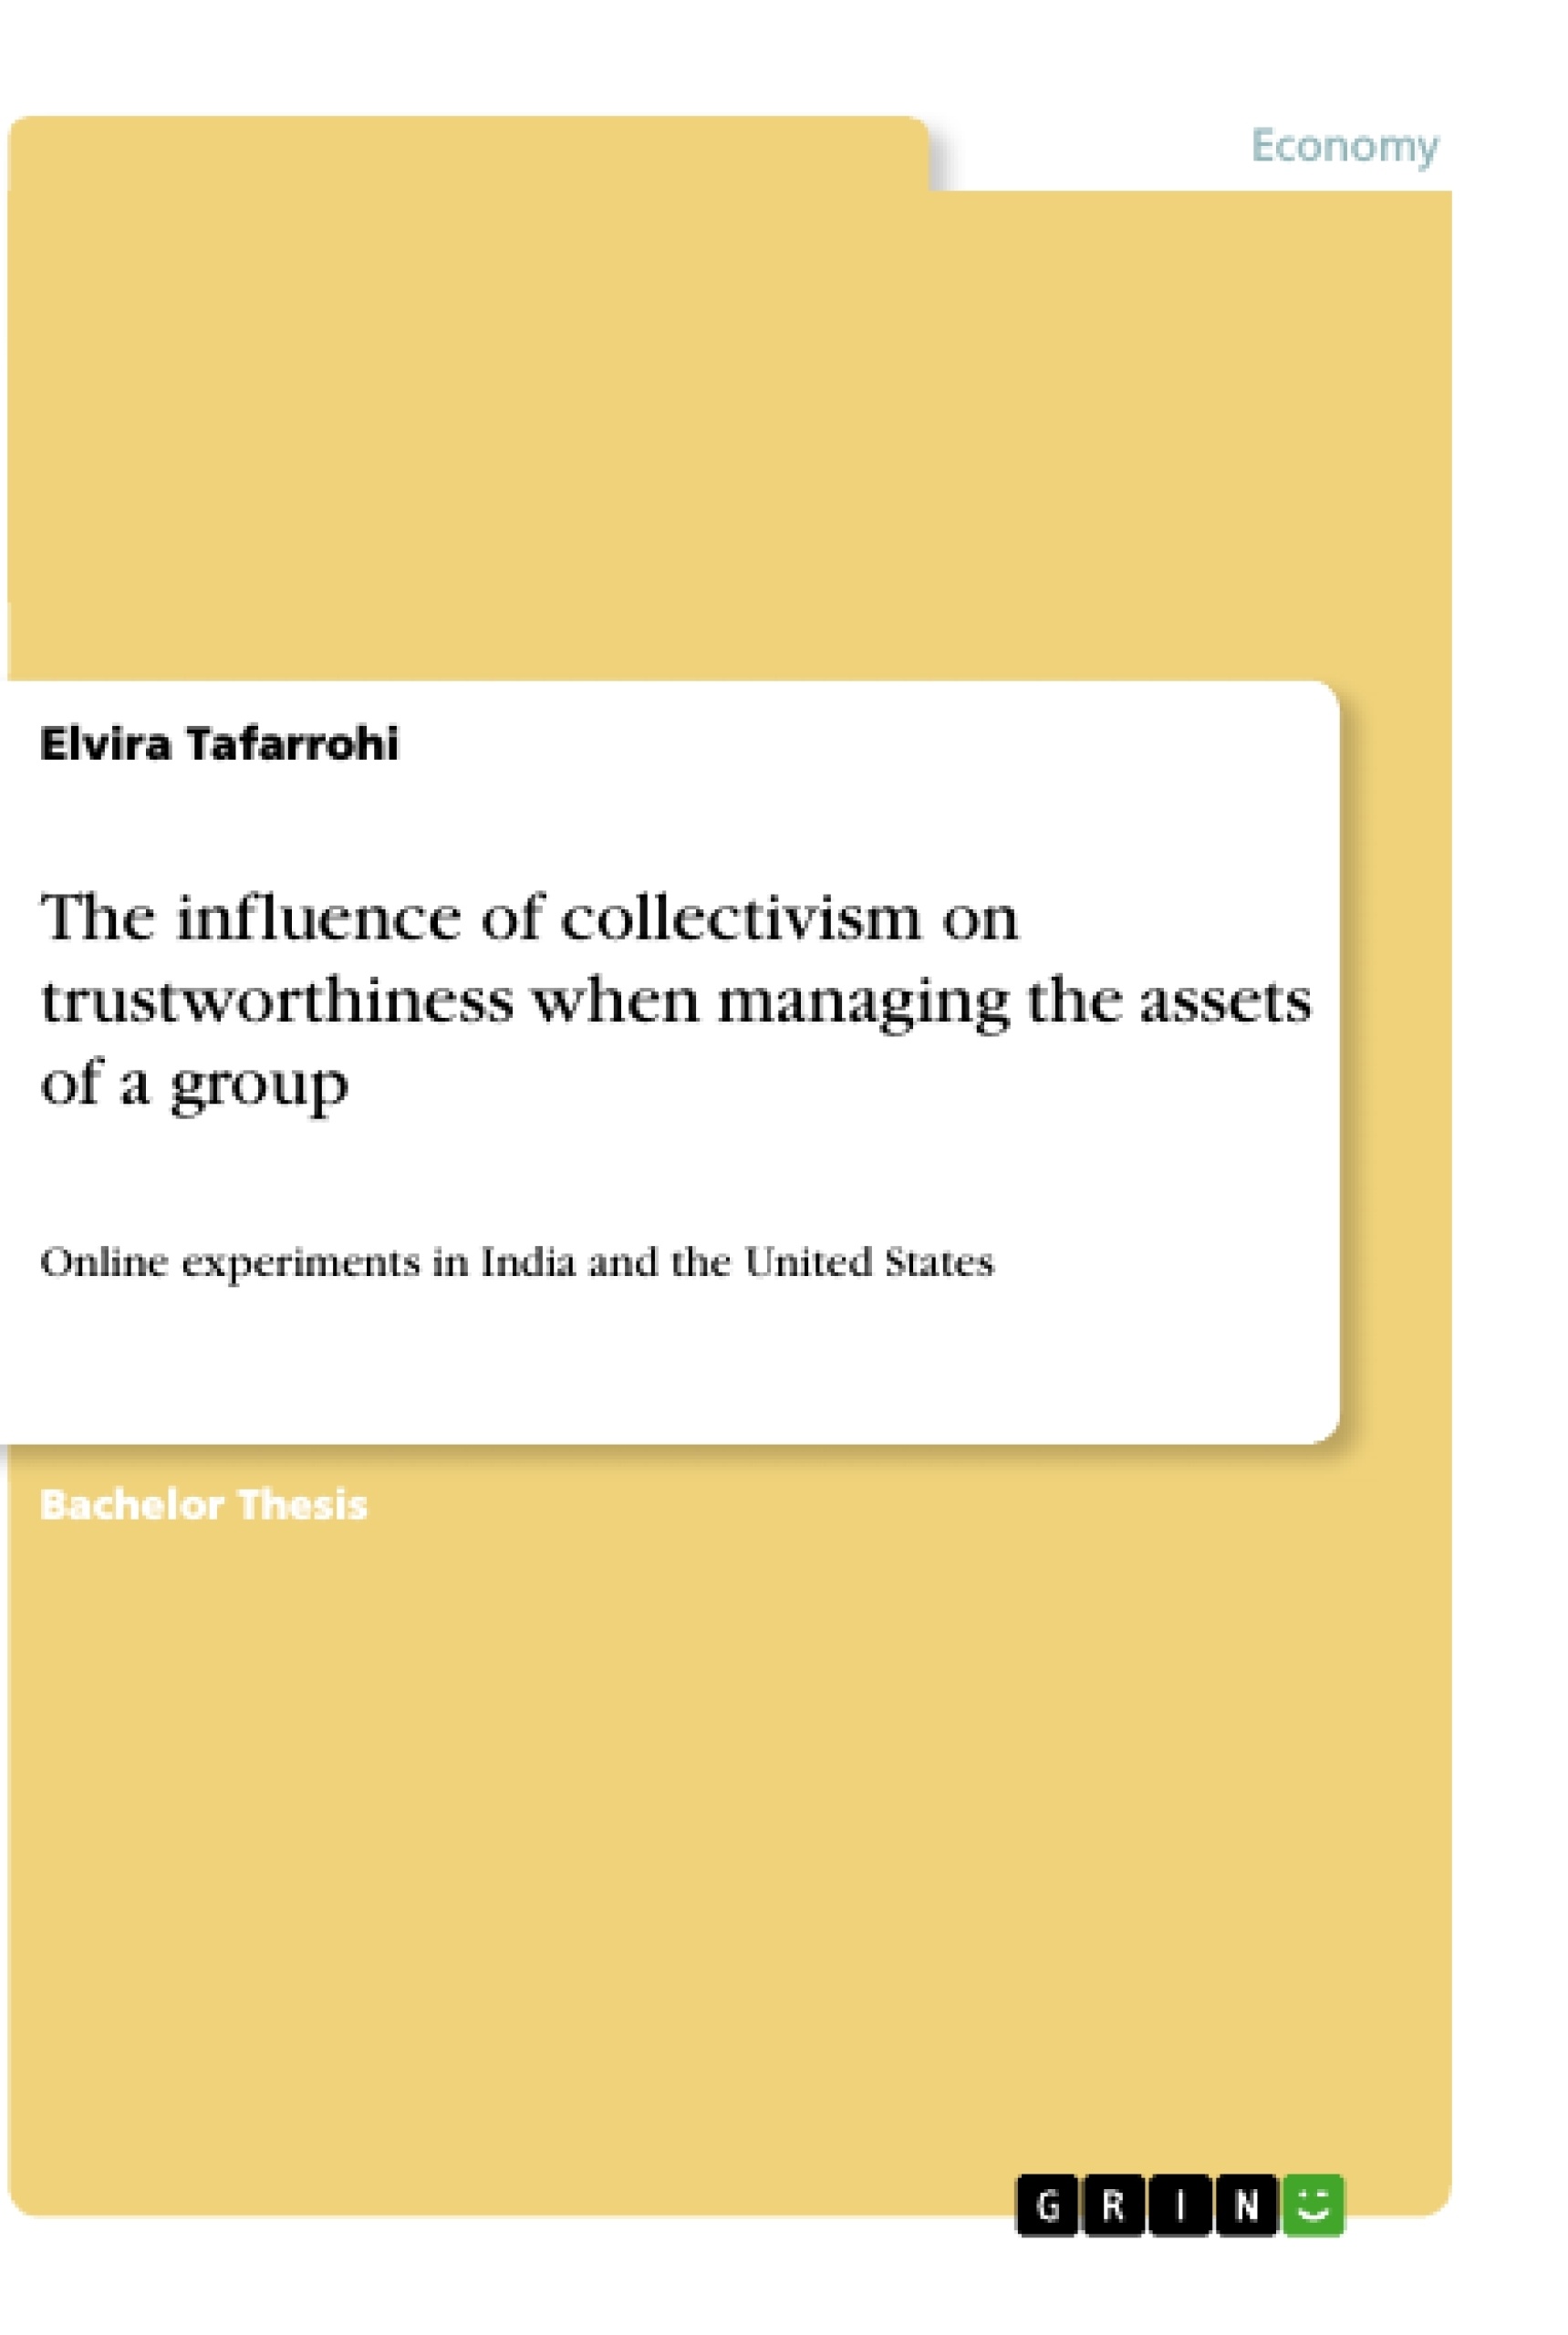 Titre: The influence of collectivism on trustworthiness when managing the assets of a group